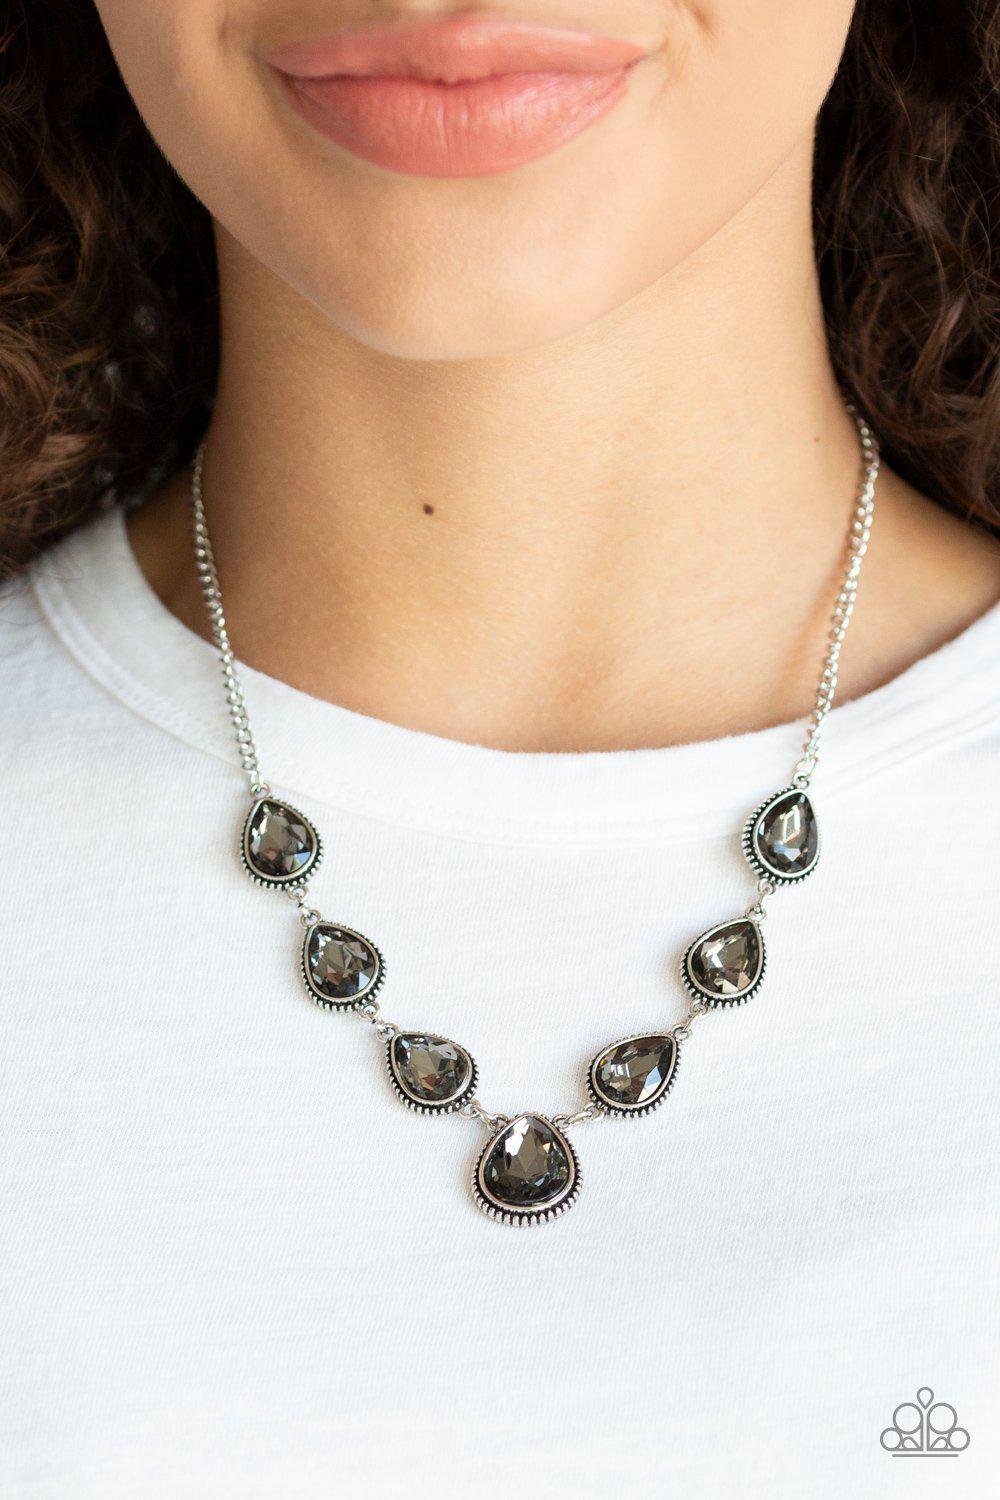 Socialite Social Silver and Smoky Teardrop Gem Necklace - Paparazzi Accessories-CarasShop.com - $5 Jewelry by Cara Jewels